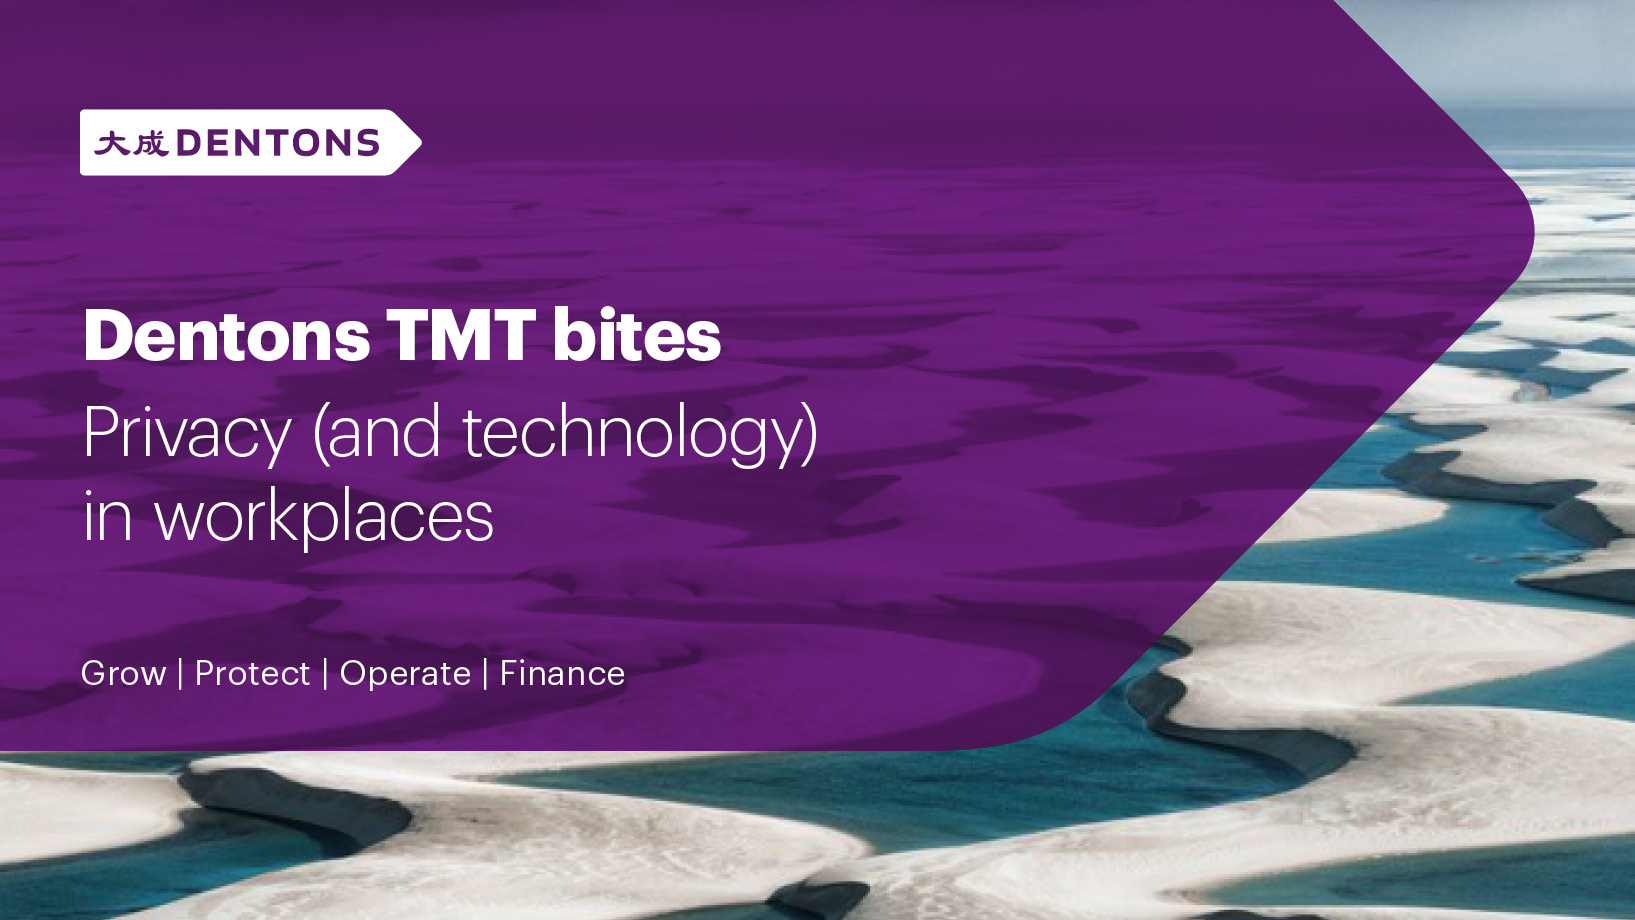 Dentons TMT Bites. Privacy and technology in workplaces. Grow. Protect. Operate. Finance.